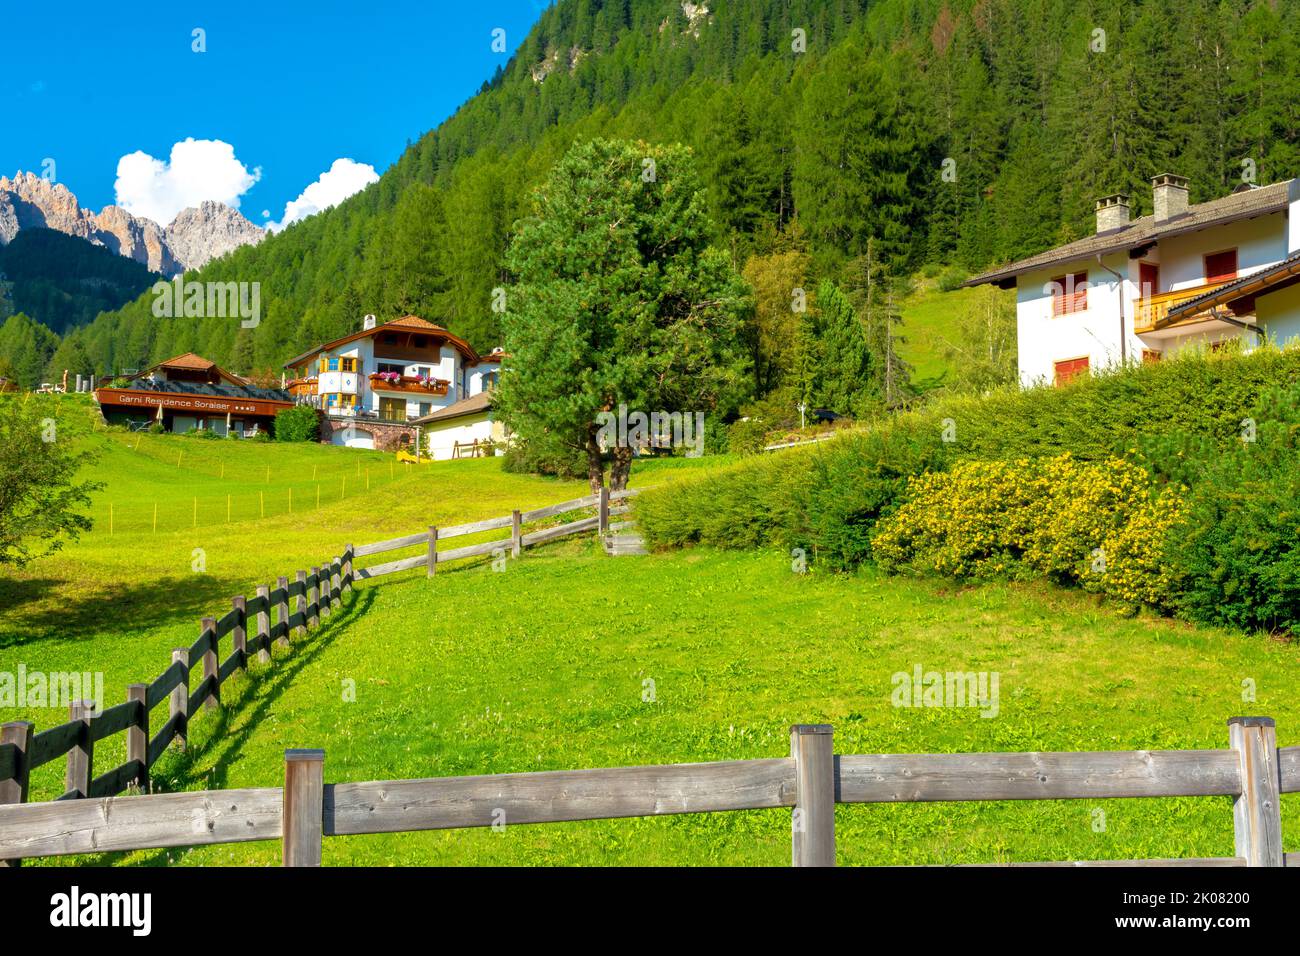 Santa Cristina Valgardena, town and commune in northern Italy, located in the Dolomites / Italy - August 29 2022: Santa Cristina Valgardena town and c Stock Photo